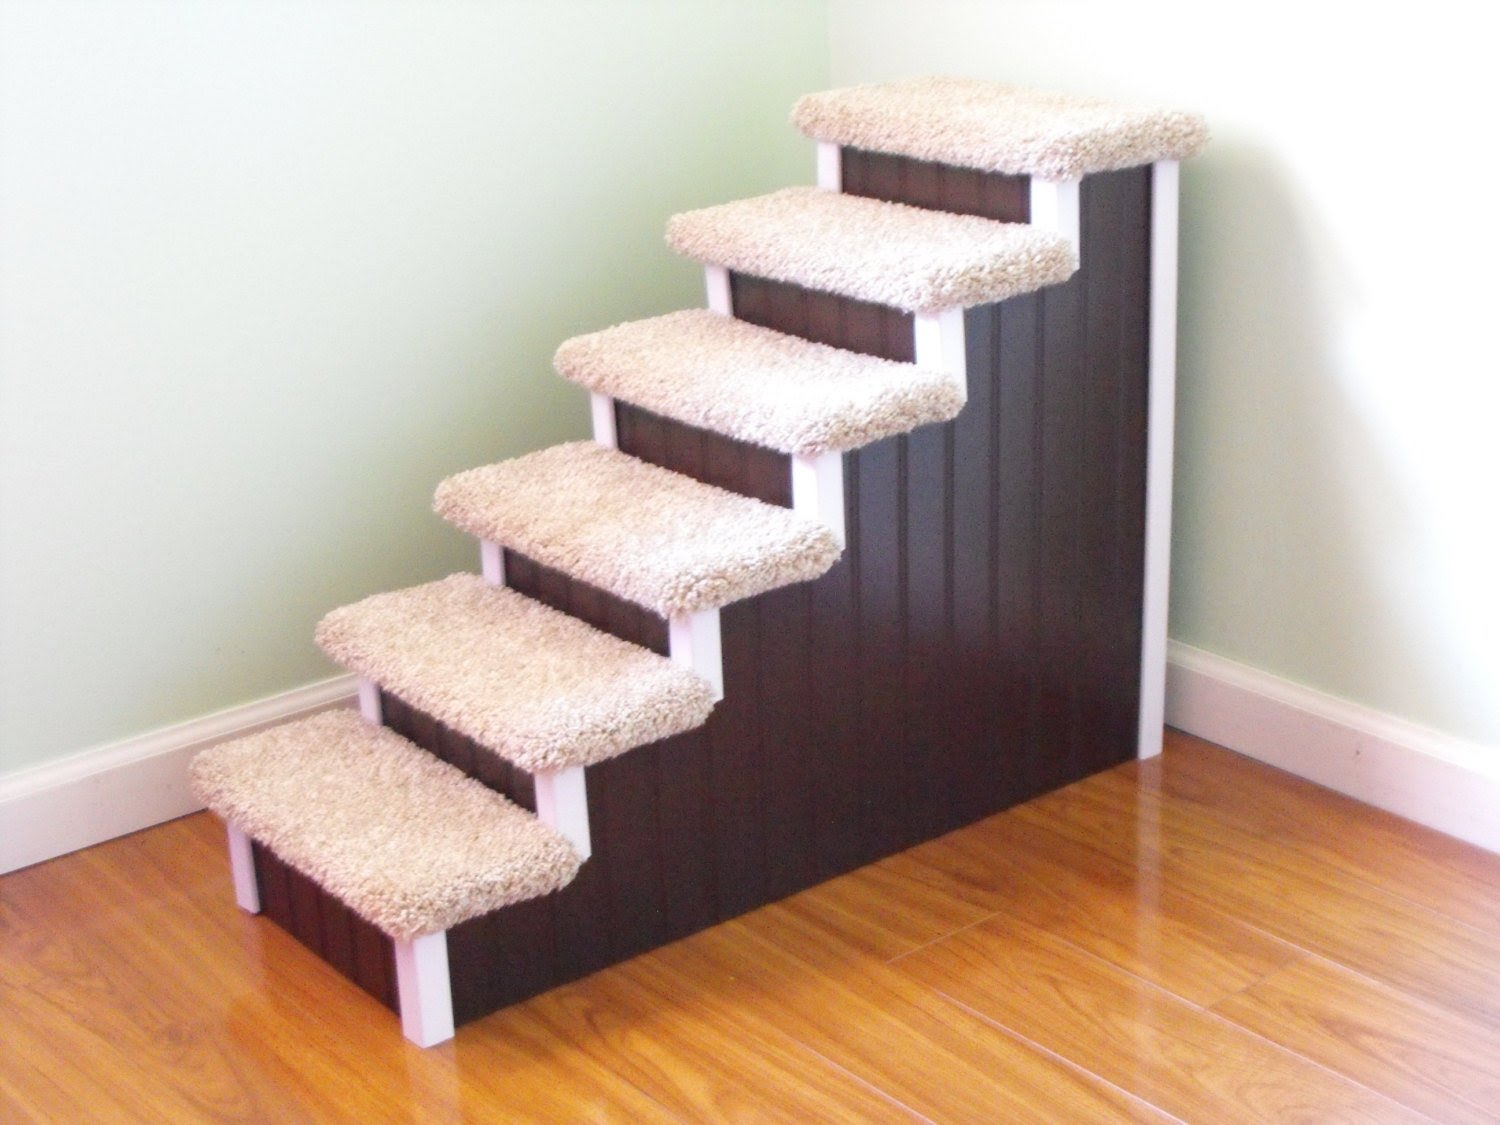 Dog Ramp for Bed Dog Stairs for Small Dogs Pet Stairs for High Beds Allmio Pet Nonslip Stairs 